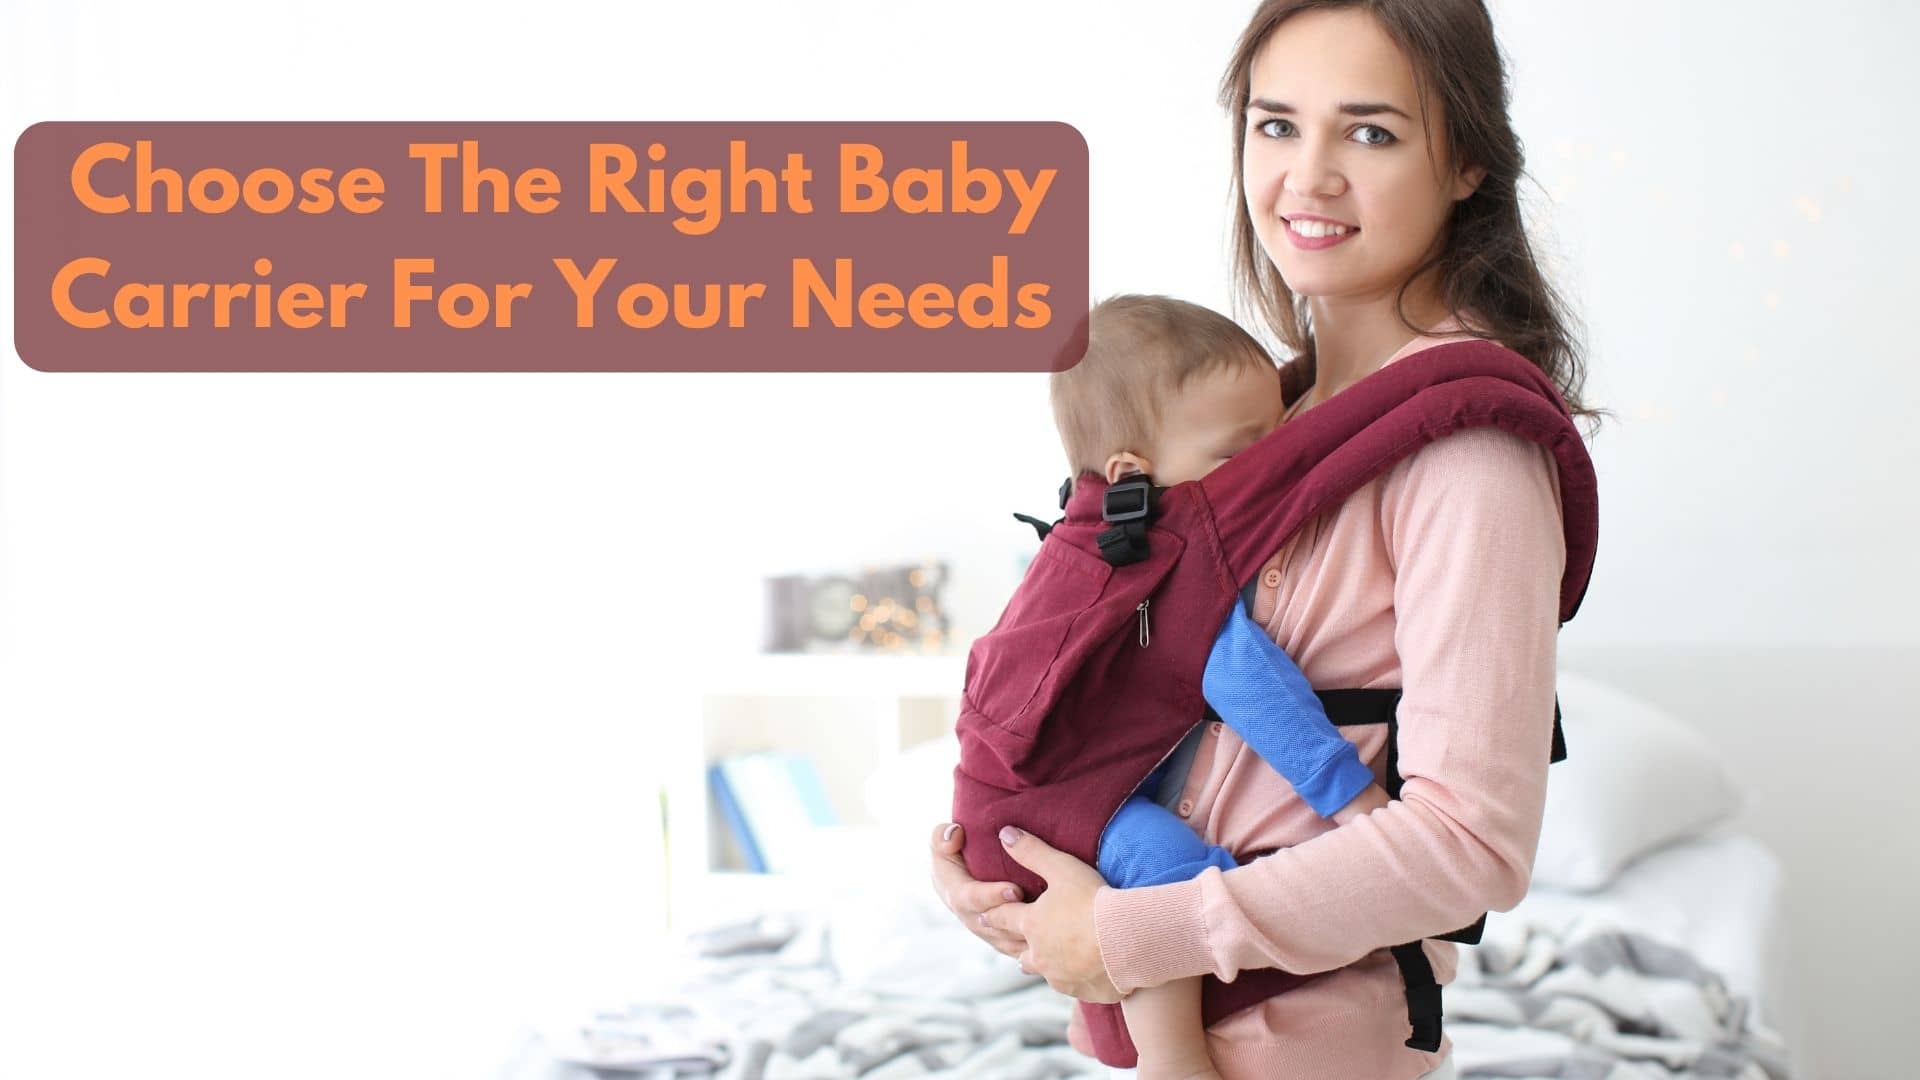 How To Choose The Right Baby Carrier For My Needs?